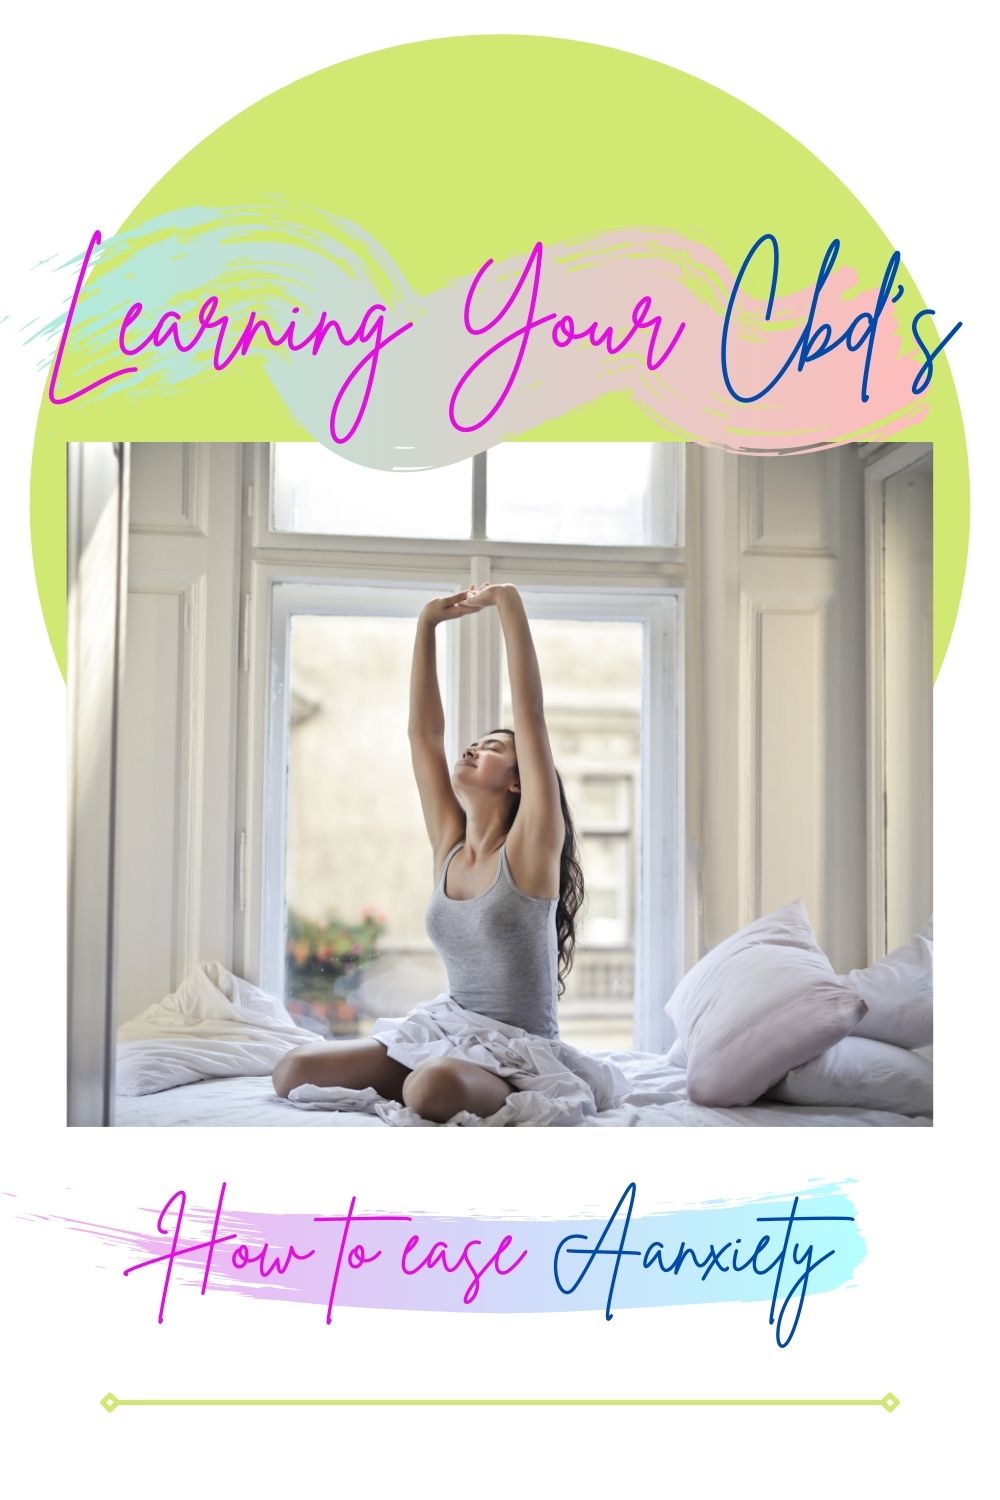 A Girl sits on her bed awaking stretching and looking relaxed in front of a window and a cool and calm room. Above reads "learn your cbd's" and below " how to ease anxiety"